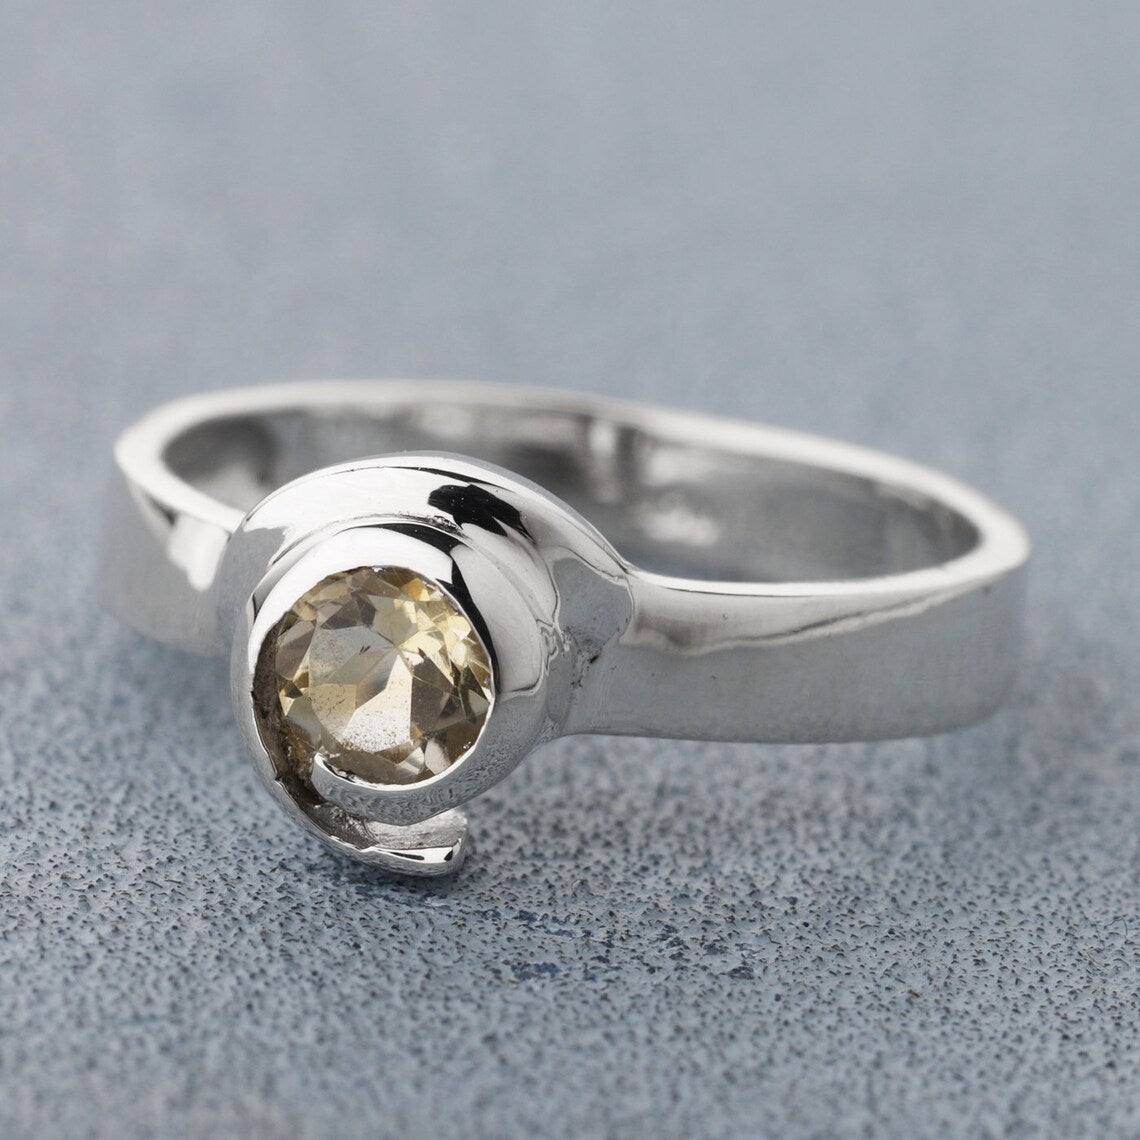 Round Cut Tiny Citrine Gemstone Ring in 925 Sterling Silver